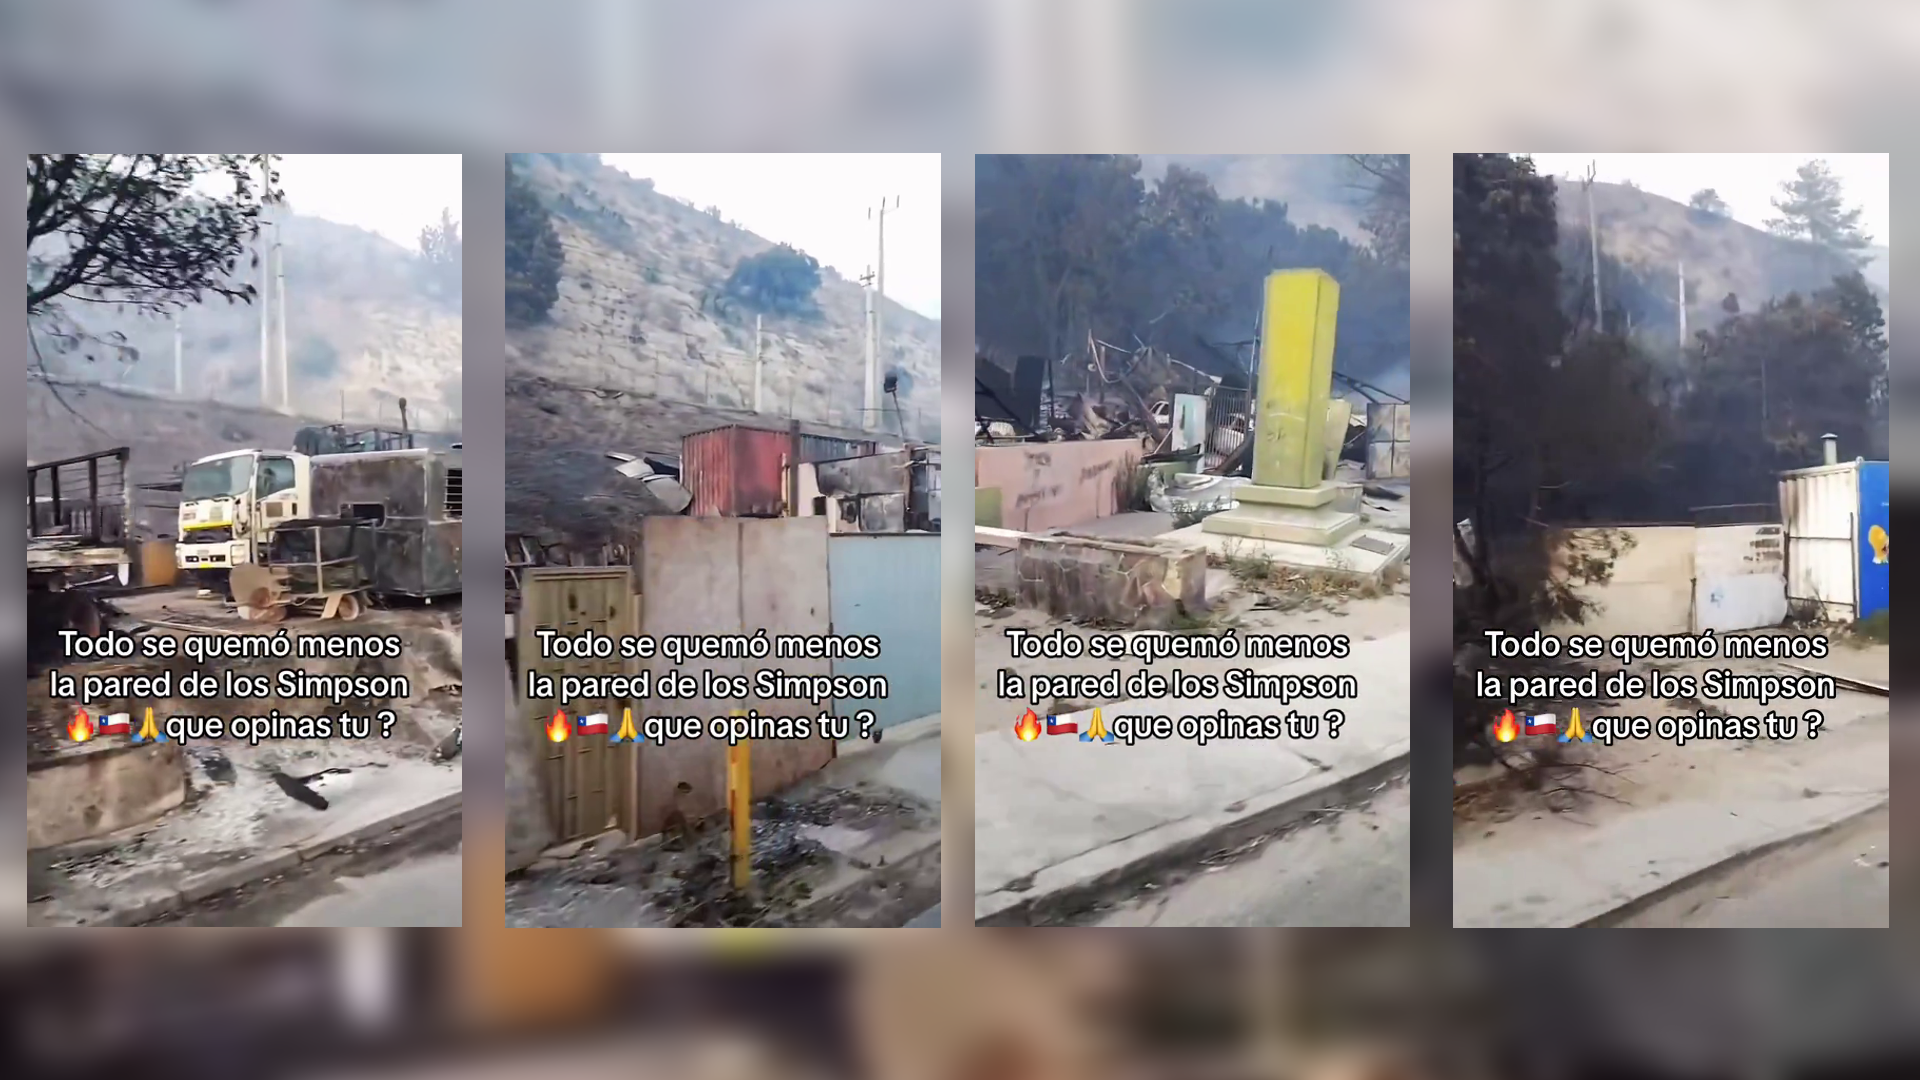 In this video, shared on Twitter, you can see that it is not just the blue object that was spared by the fire, even though that’s what viewers focused on. For example, a truck, a wooden door and some kind of structure made out of concrete and painted yellow were also spared.